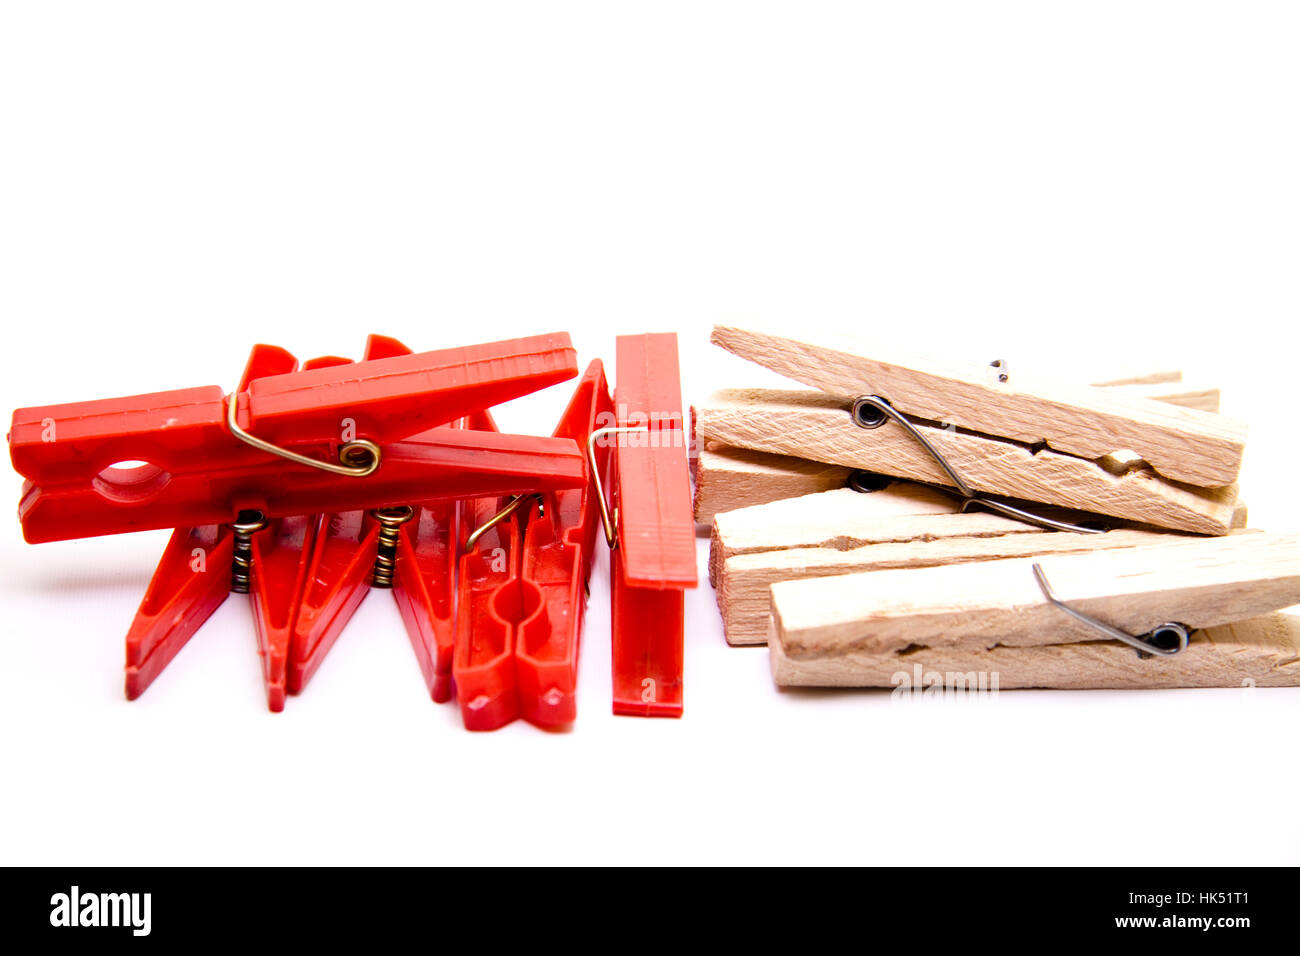 household, clothespins, object, household, wood, plastic, synthetic material, Stock Photo